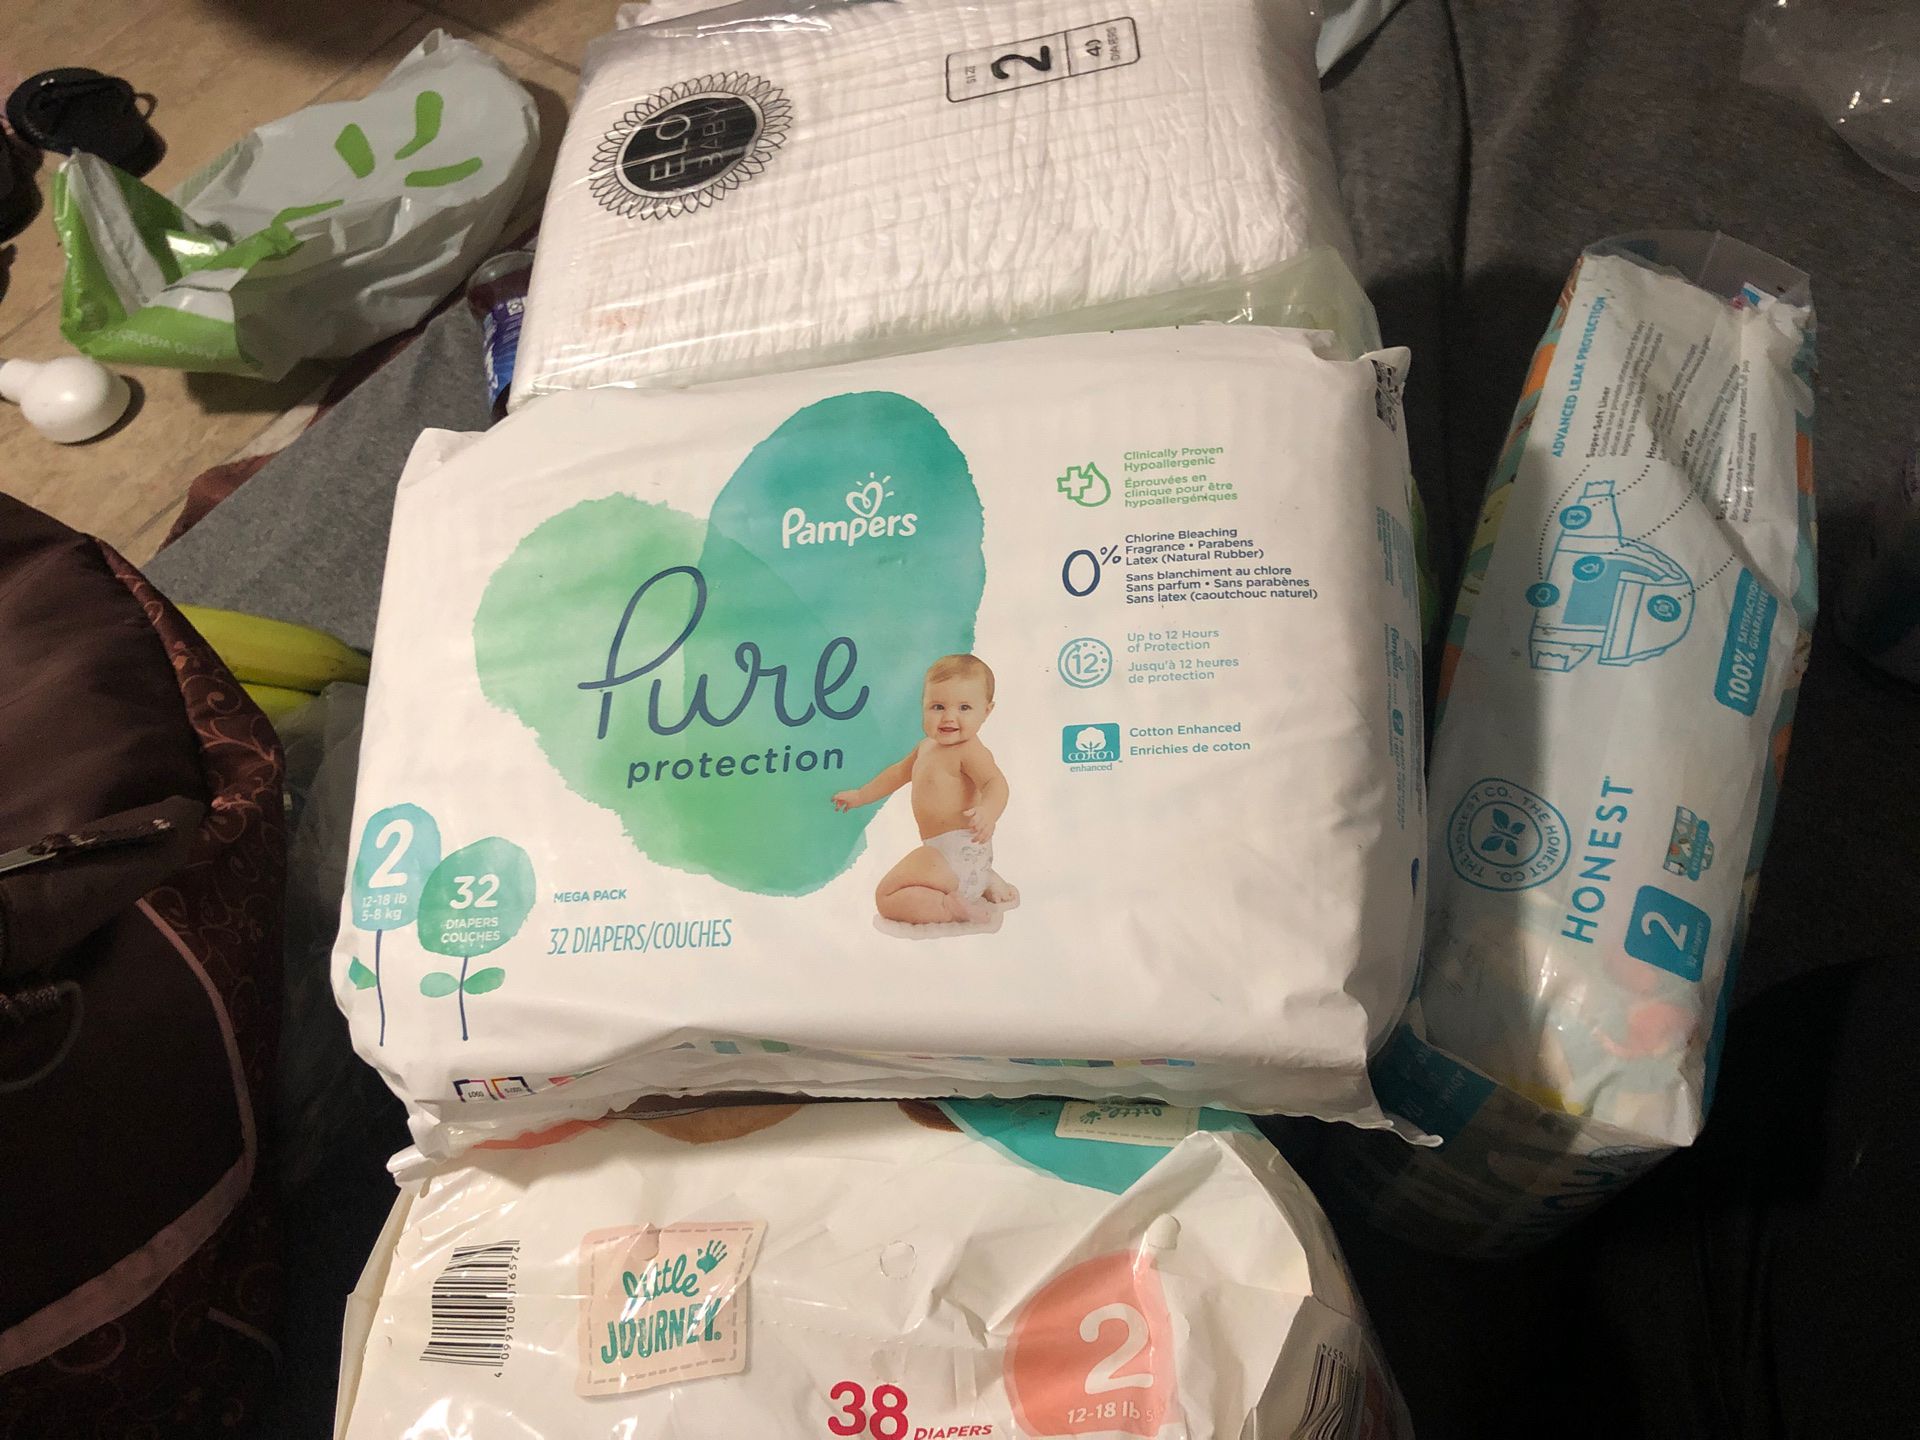 Pampers, honest, and more options